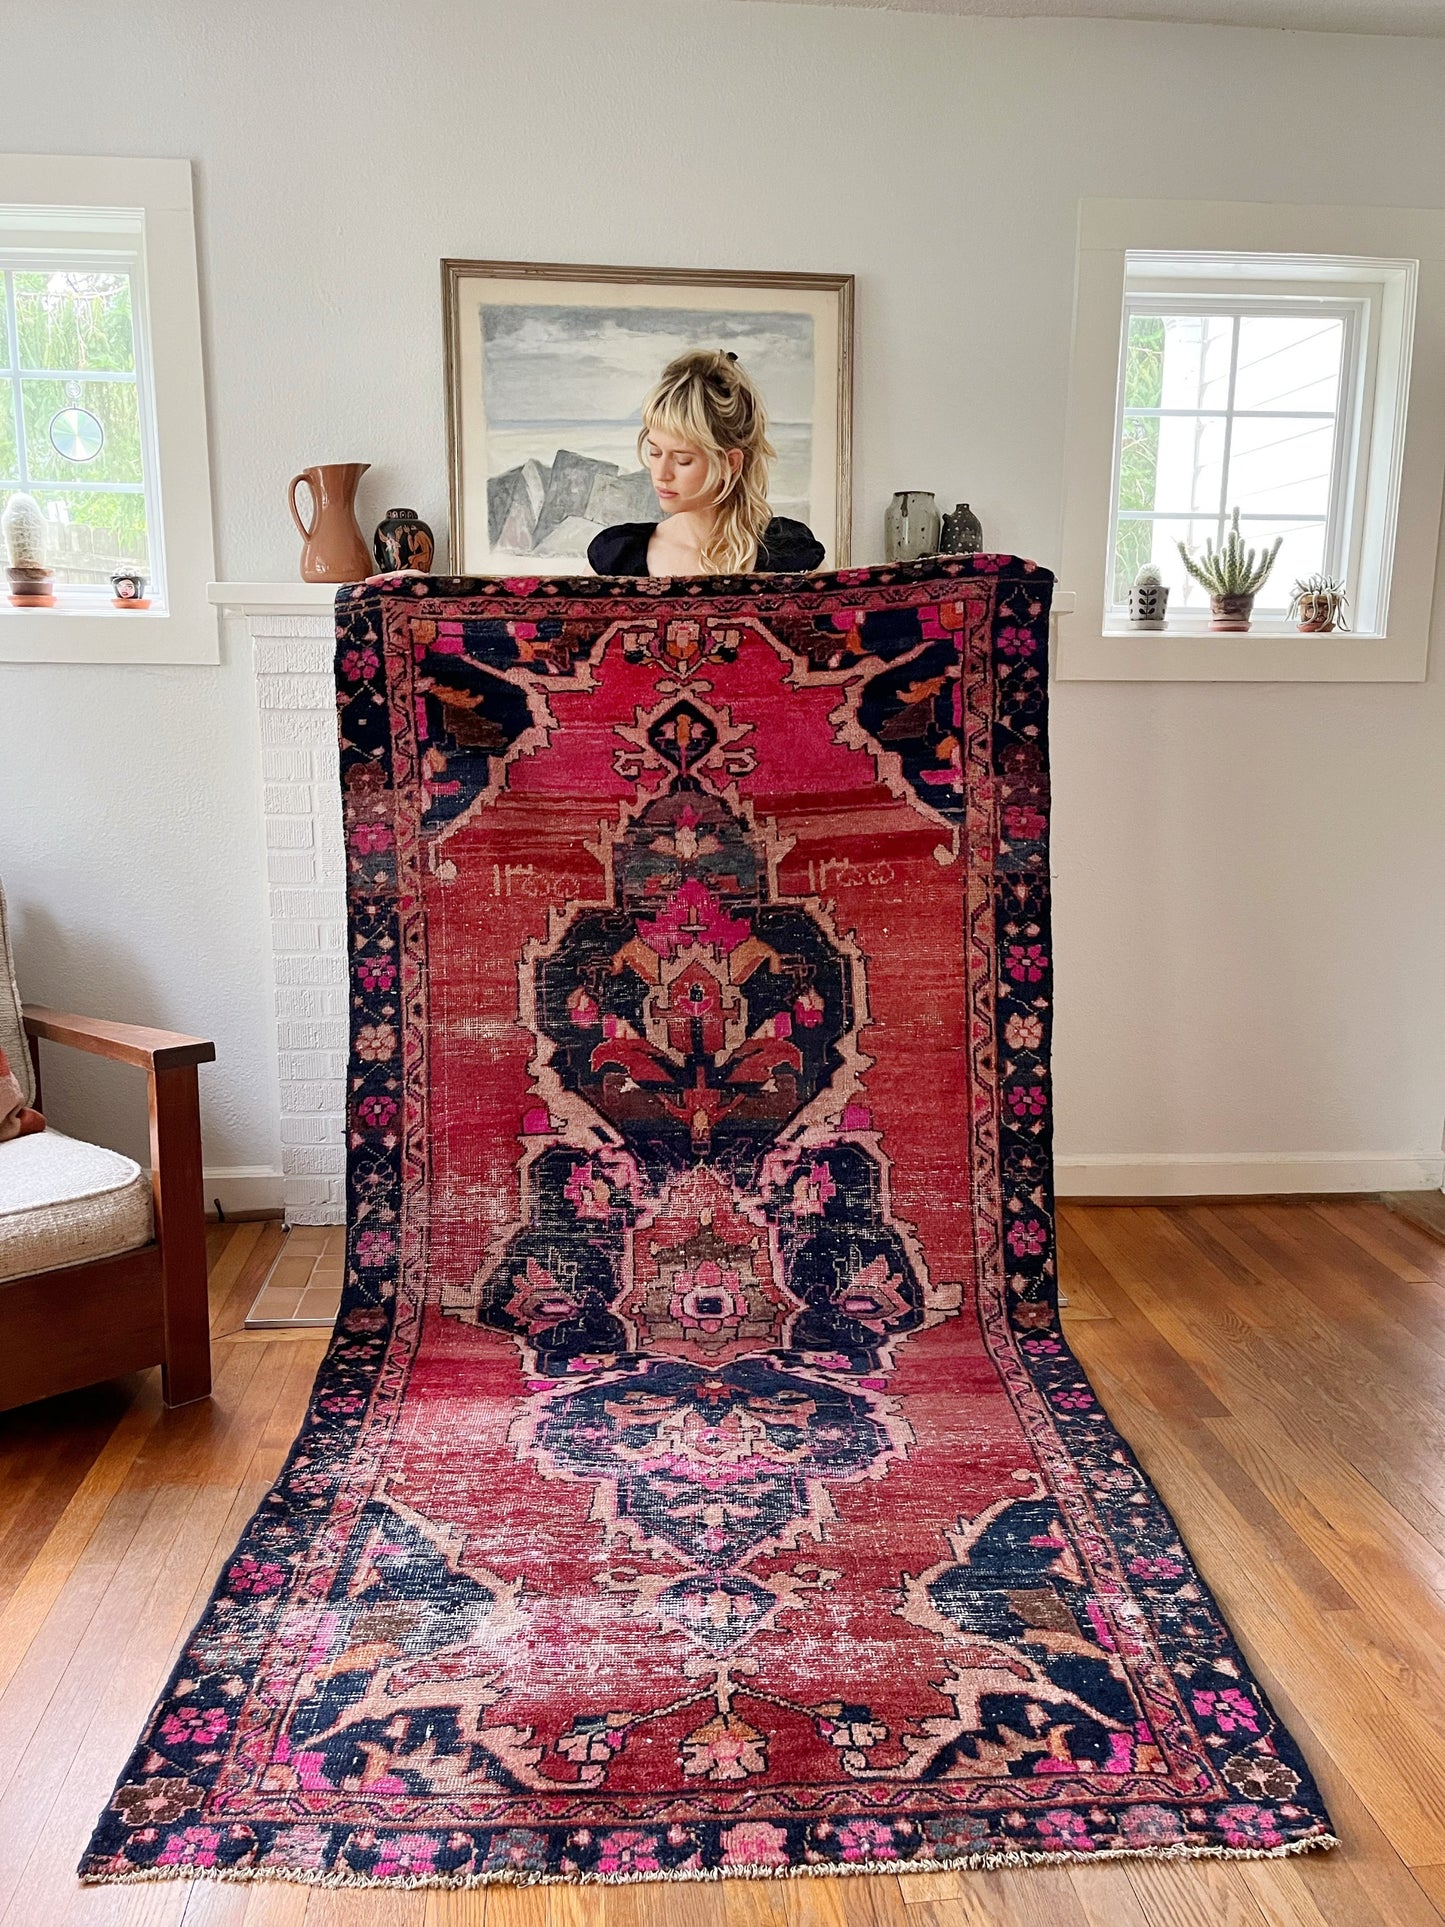 The Lili Persian rug is a timeless piece that enhances any setting